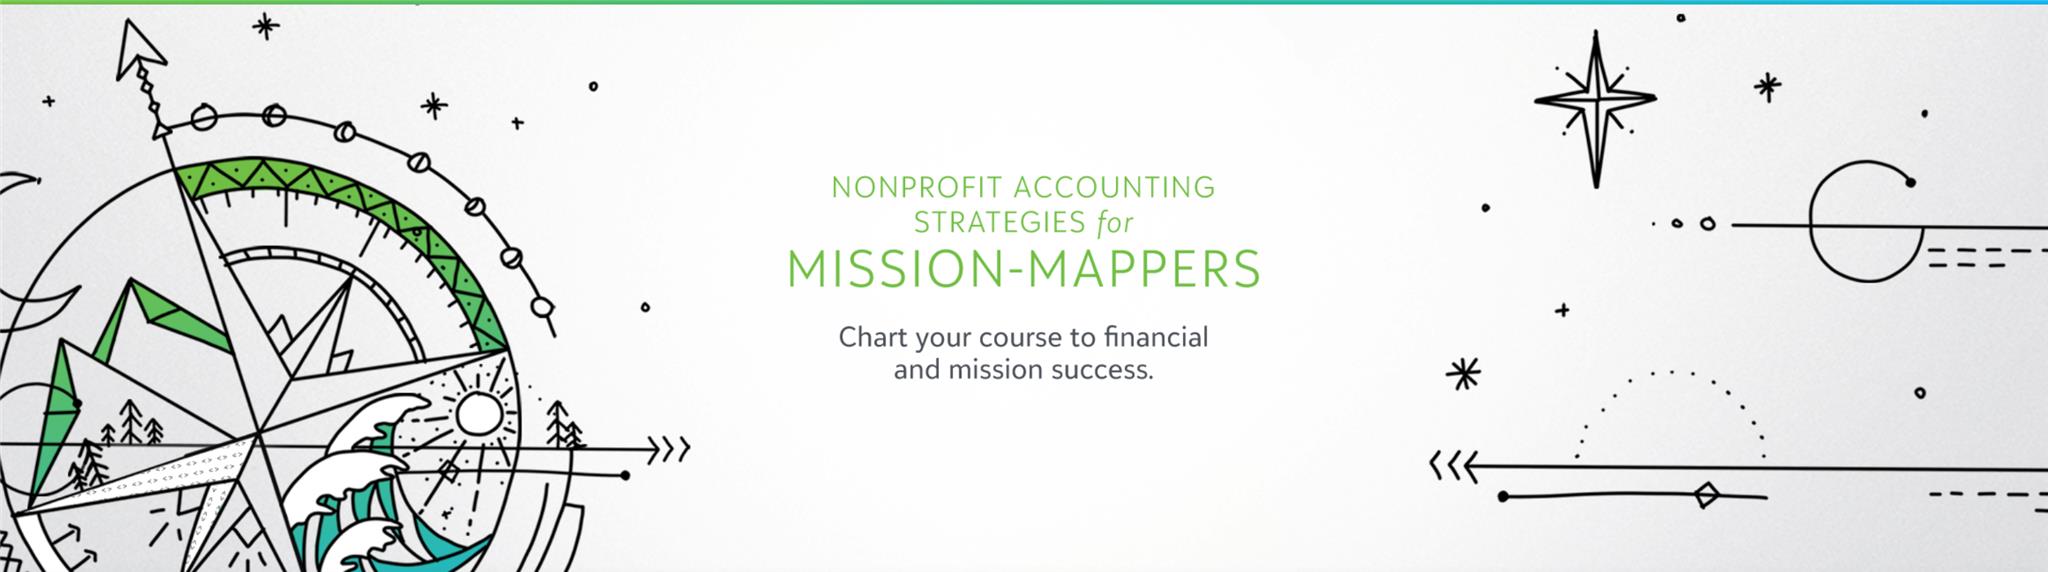 finance resources for nonprofits